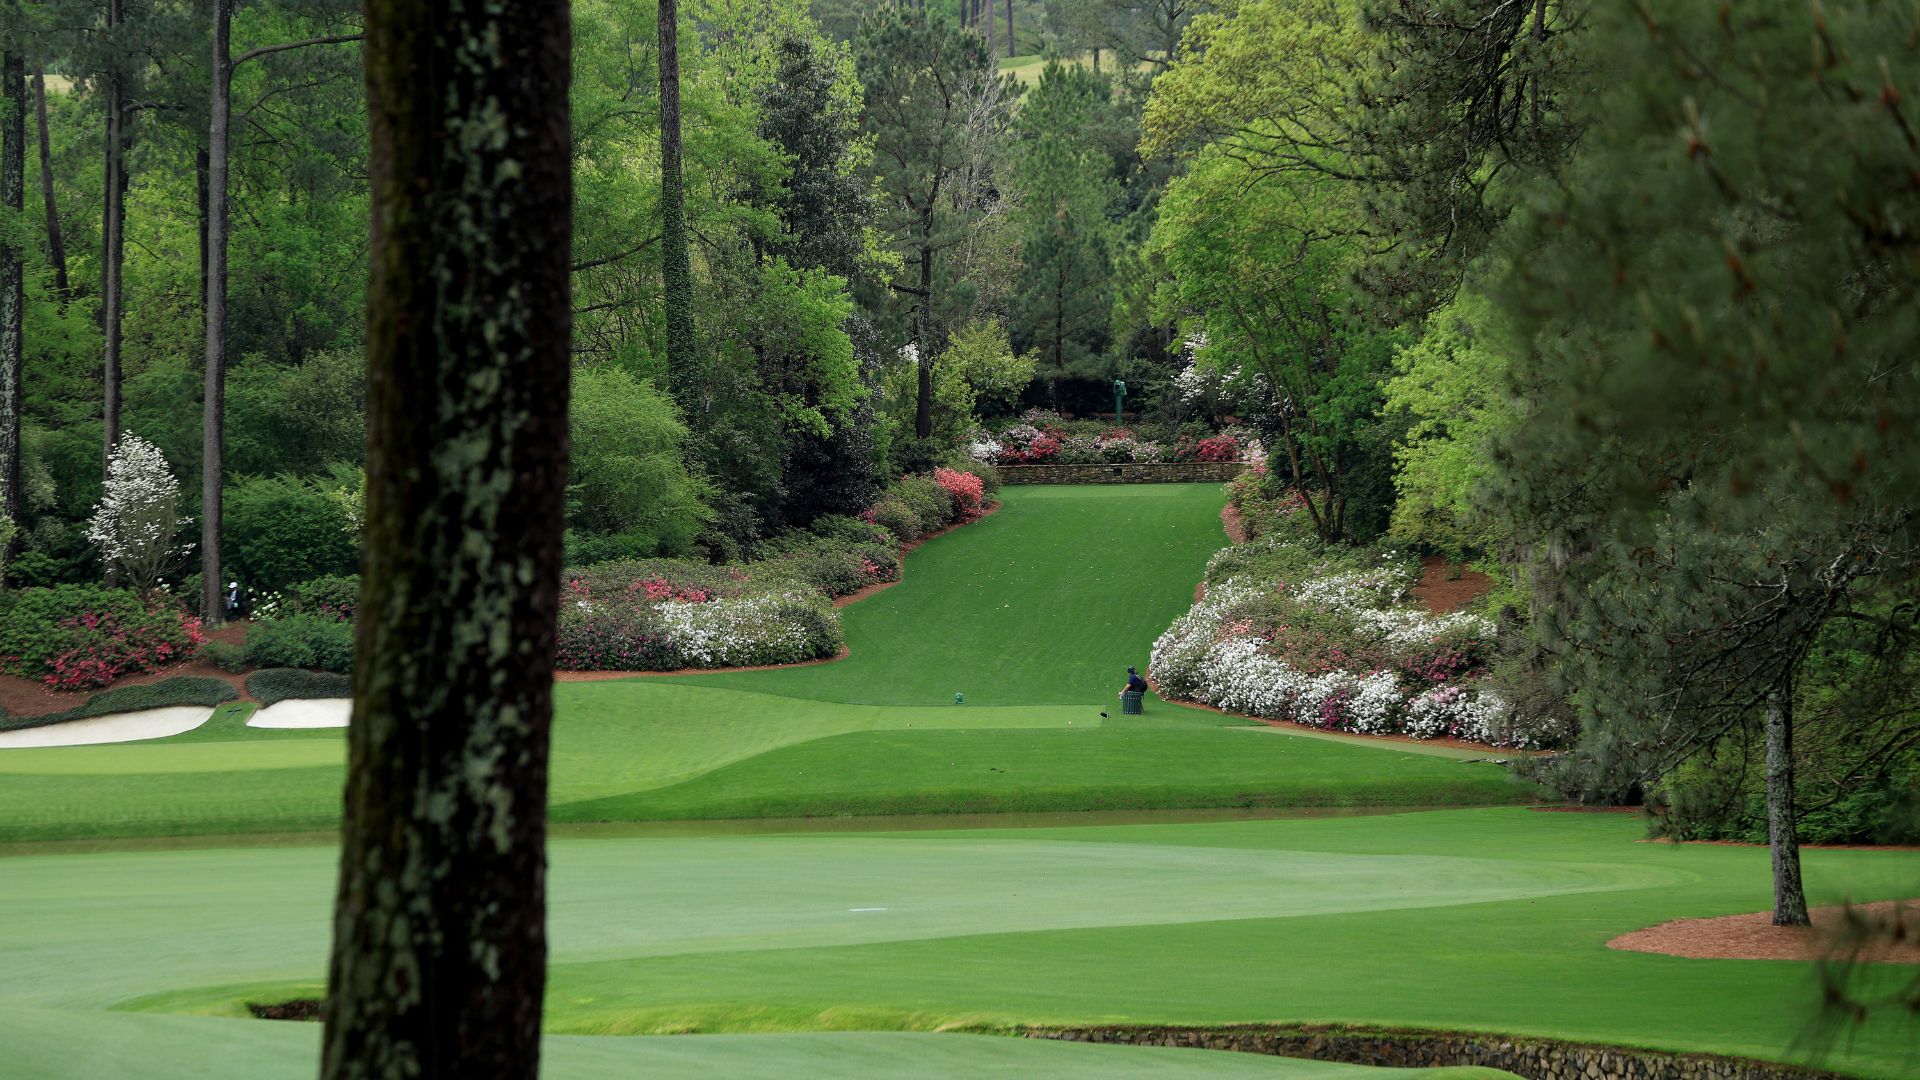 2023 Masters: Augusta National chairman Fred Ridley says changes to No. 13 were to increase excitement